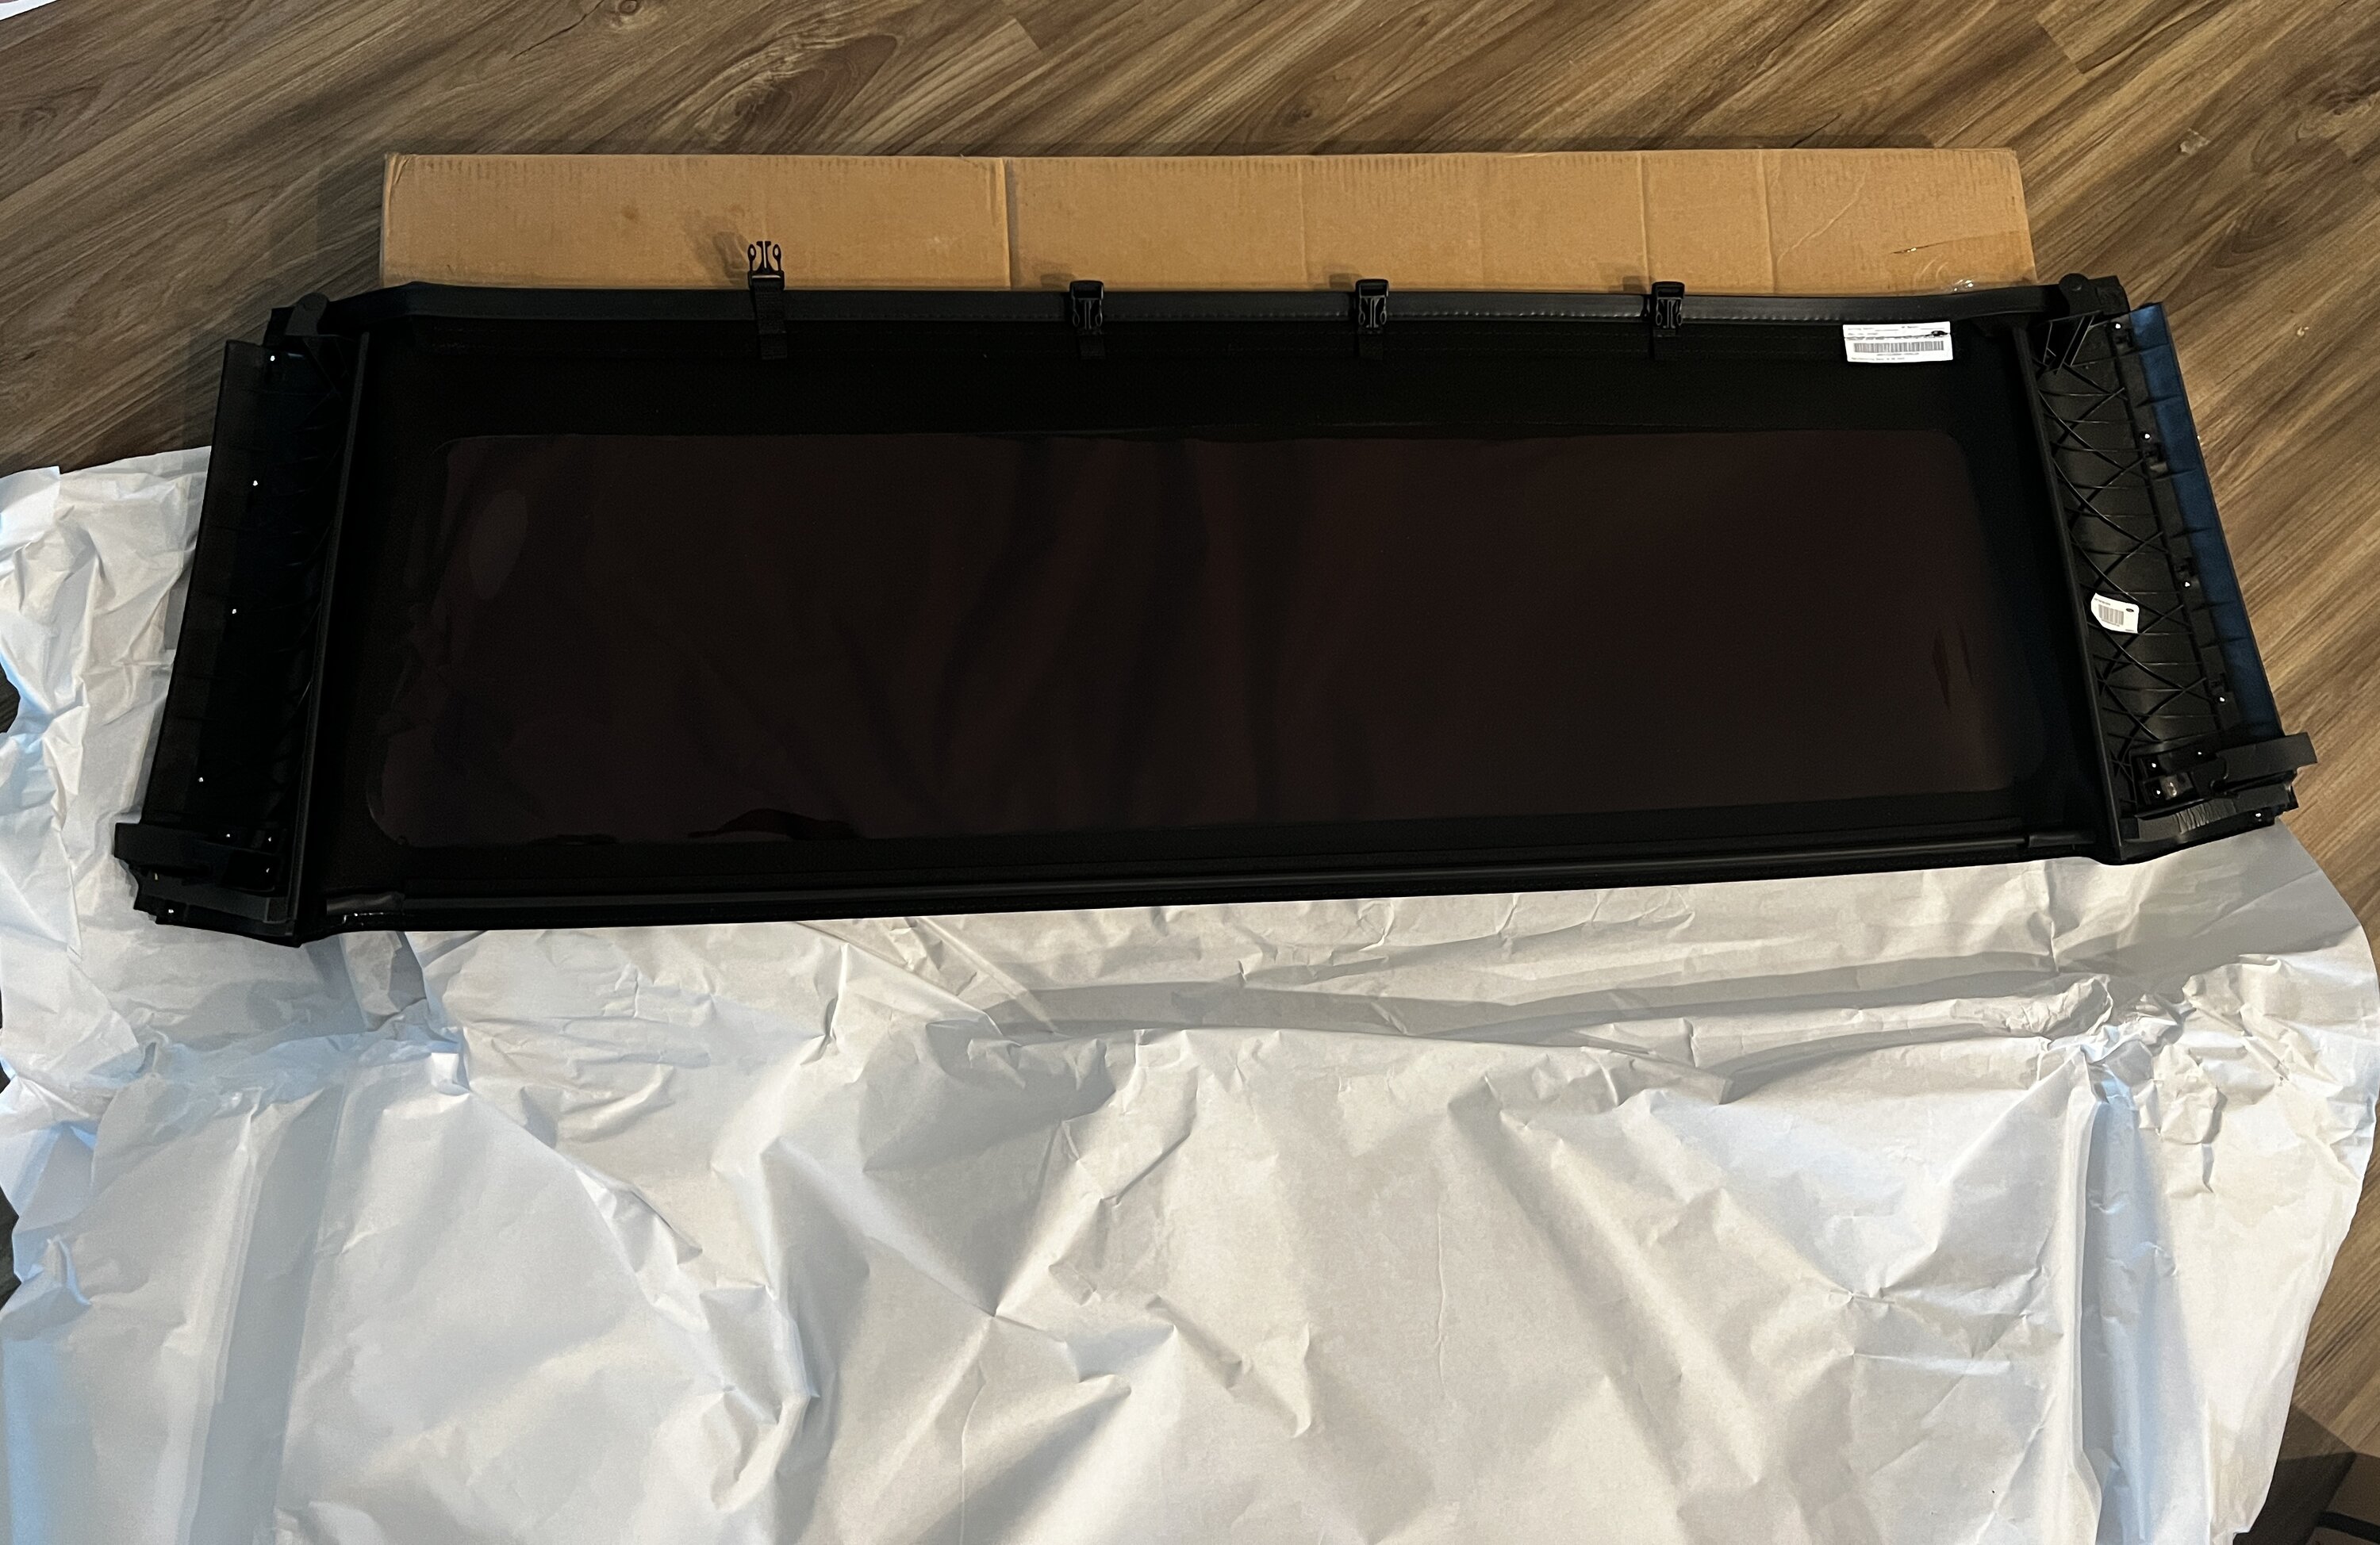 Ford Bronco OEM Soft Top Rear Window- SOLD F3C9A14A-D0BF-4D0D-BF19-3313CFA20482